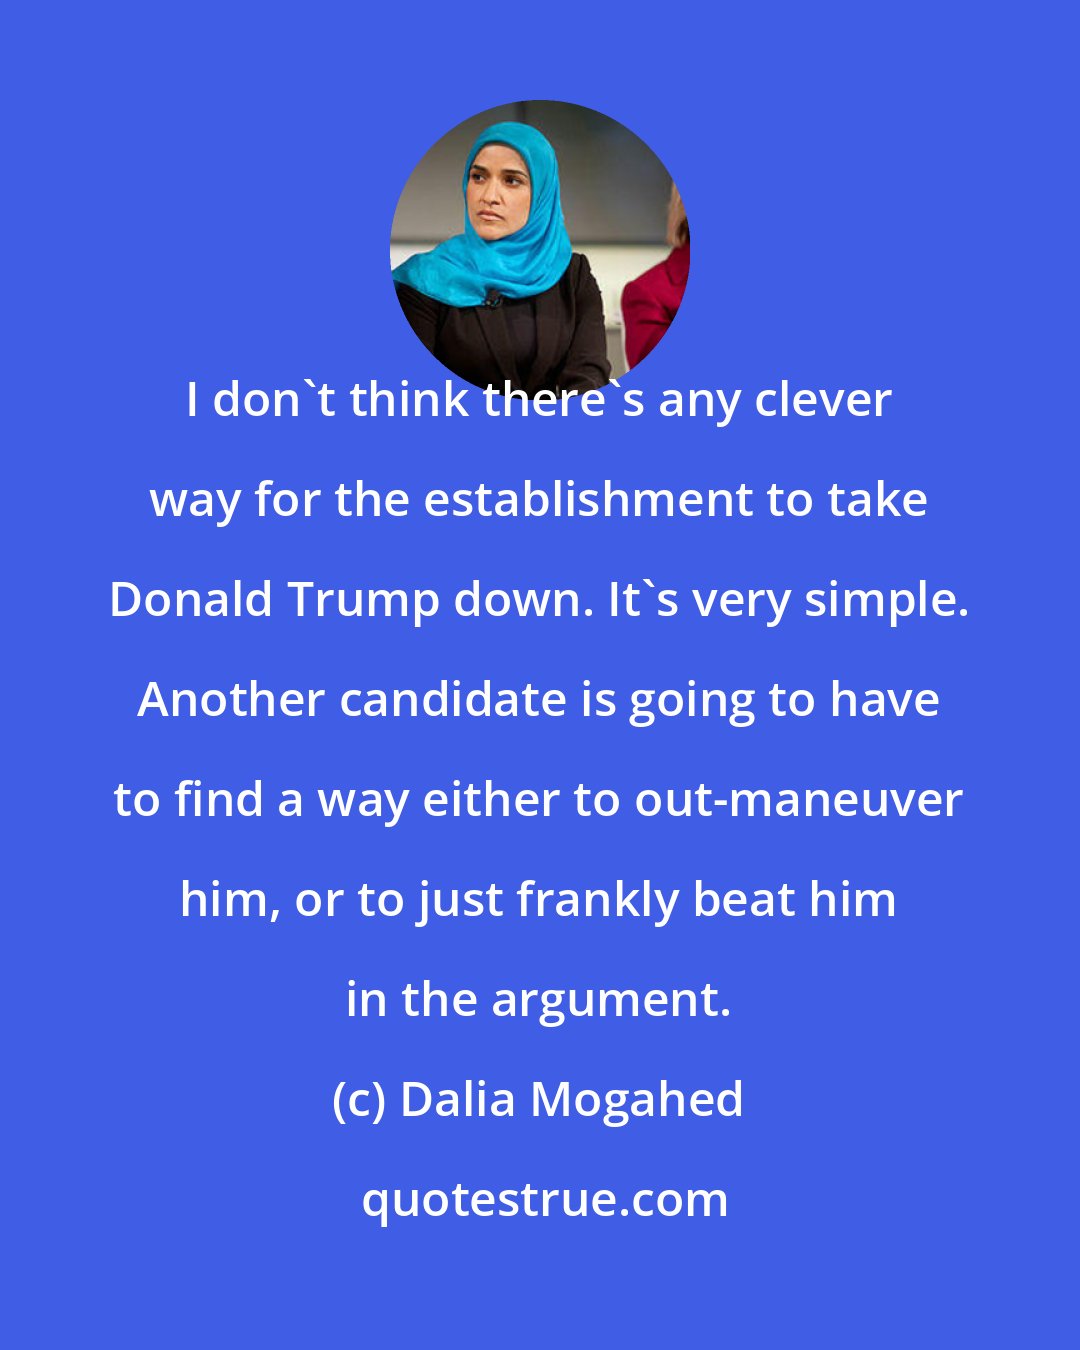 Dalia Mogahed: I don't think there's any clever way for the establishment to take Donald Trump down. It's very simple. Another candidate is going to have to find a way either to out-maneuver him, or to just frankly beat him in the argument.